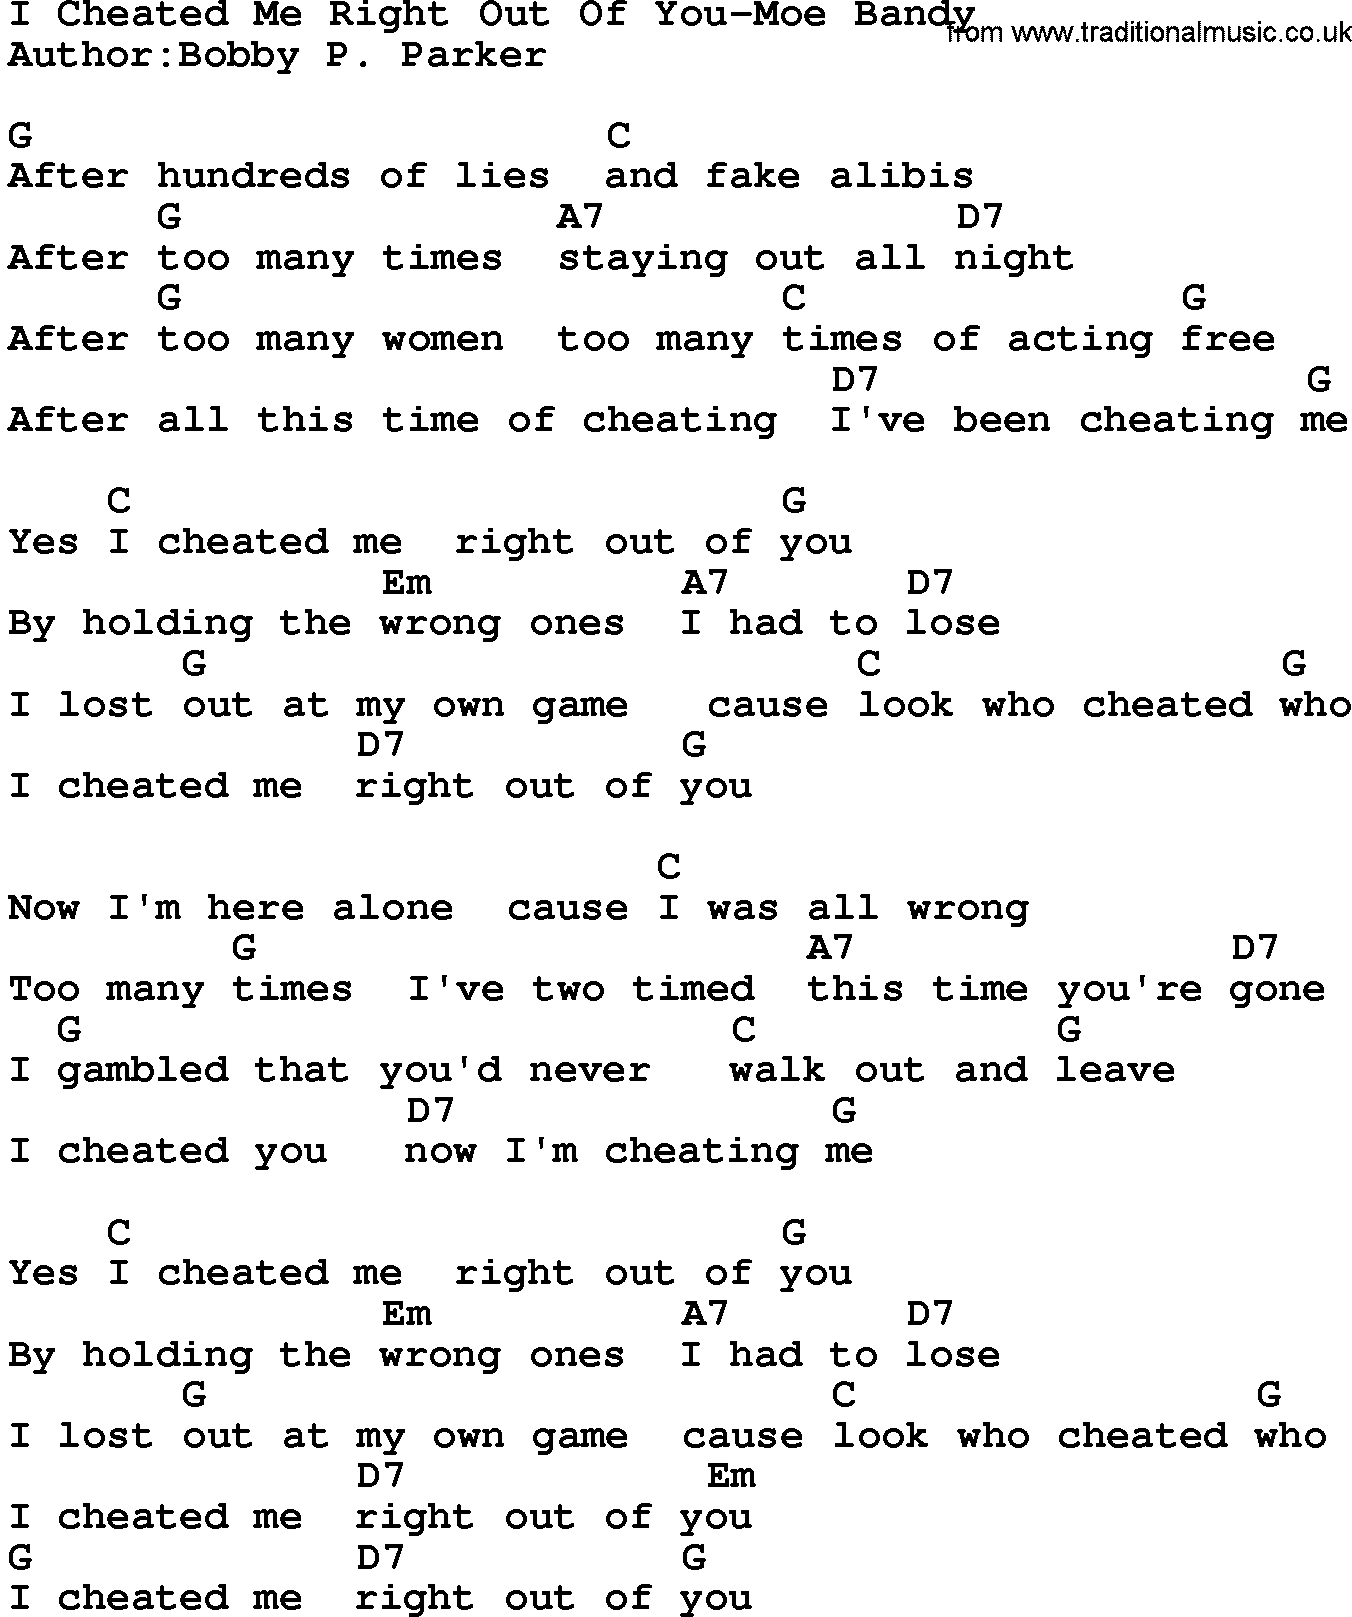 Country music song: I Cheated Me Right Out Of You-Moe Bandy lyrics and chords